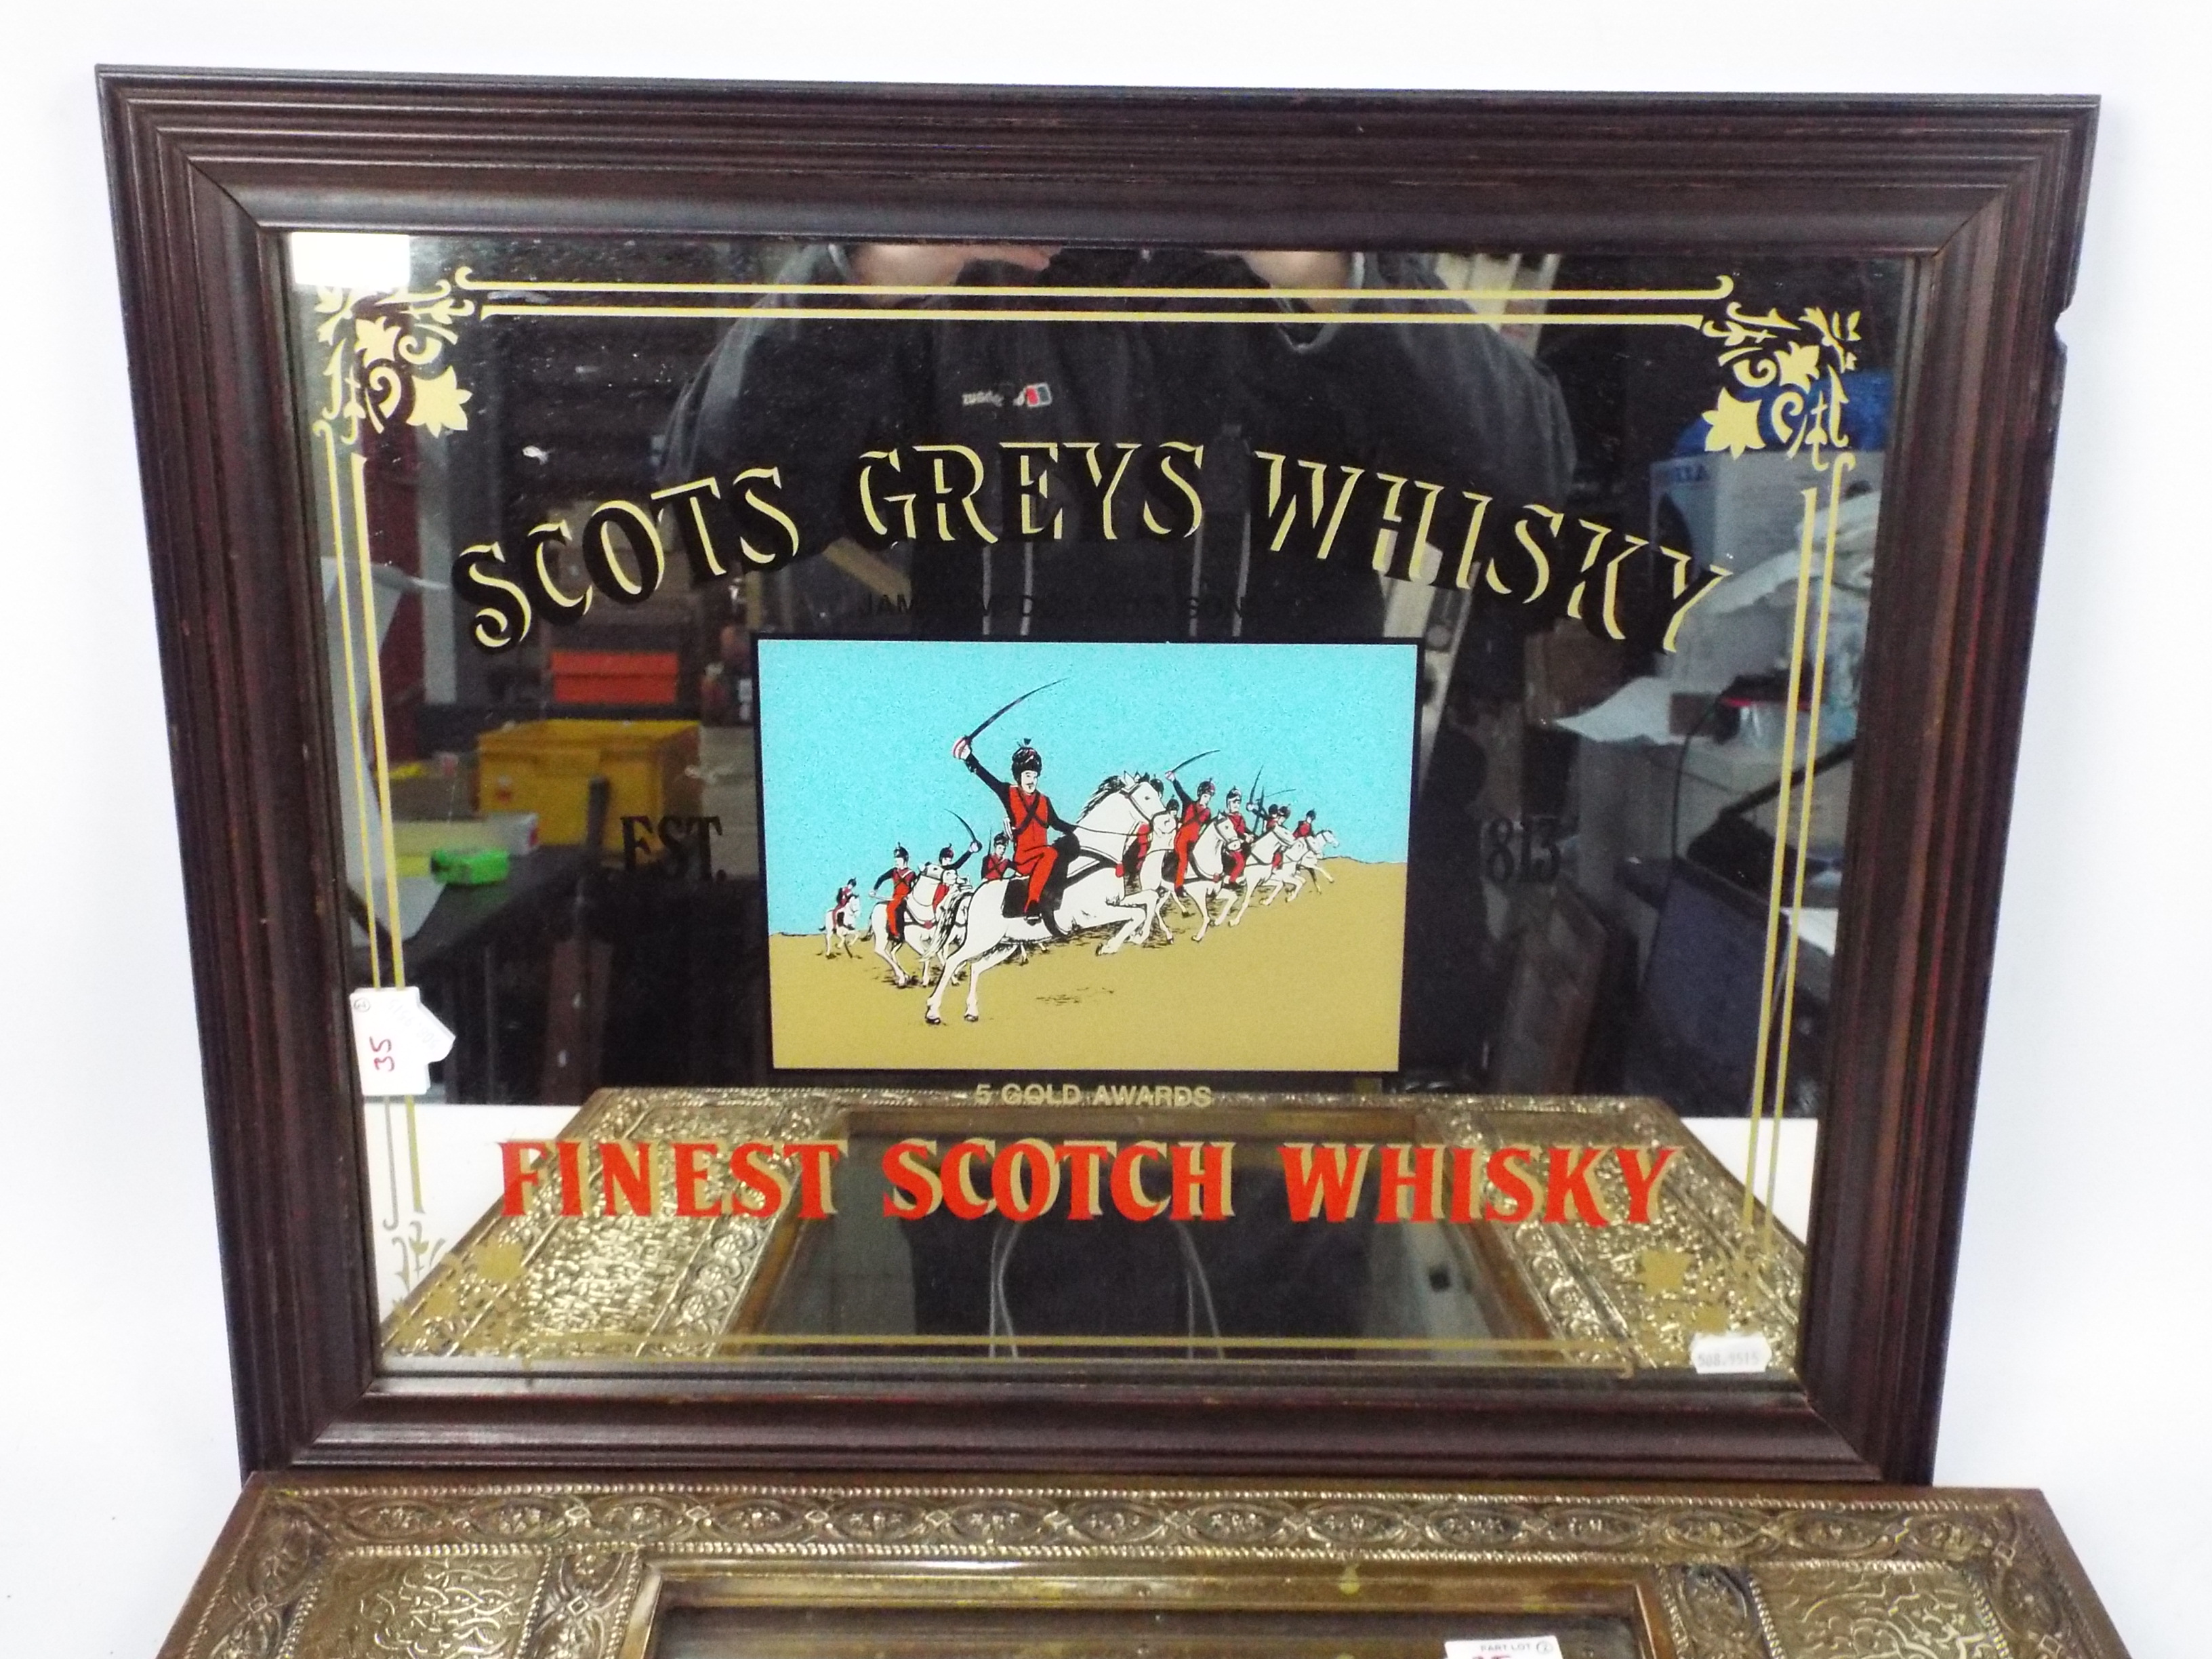 An advertising mirror for Scots Greys Wh - Image 2 of 3